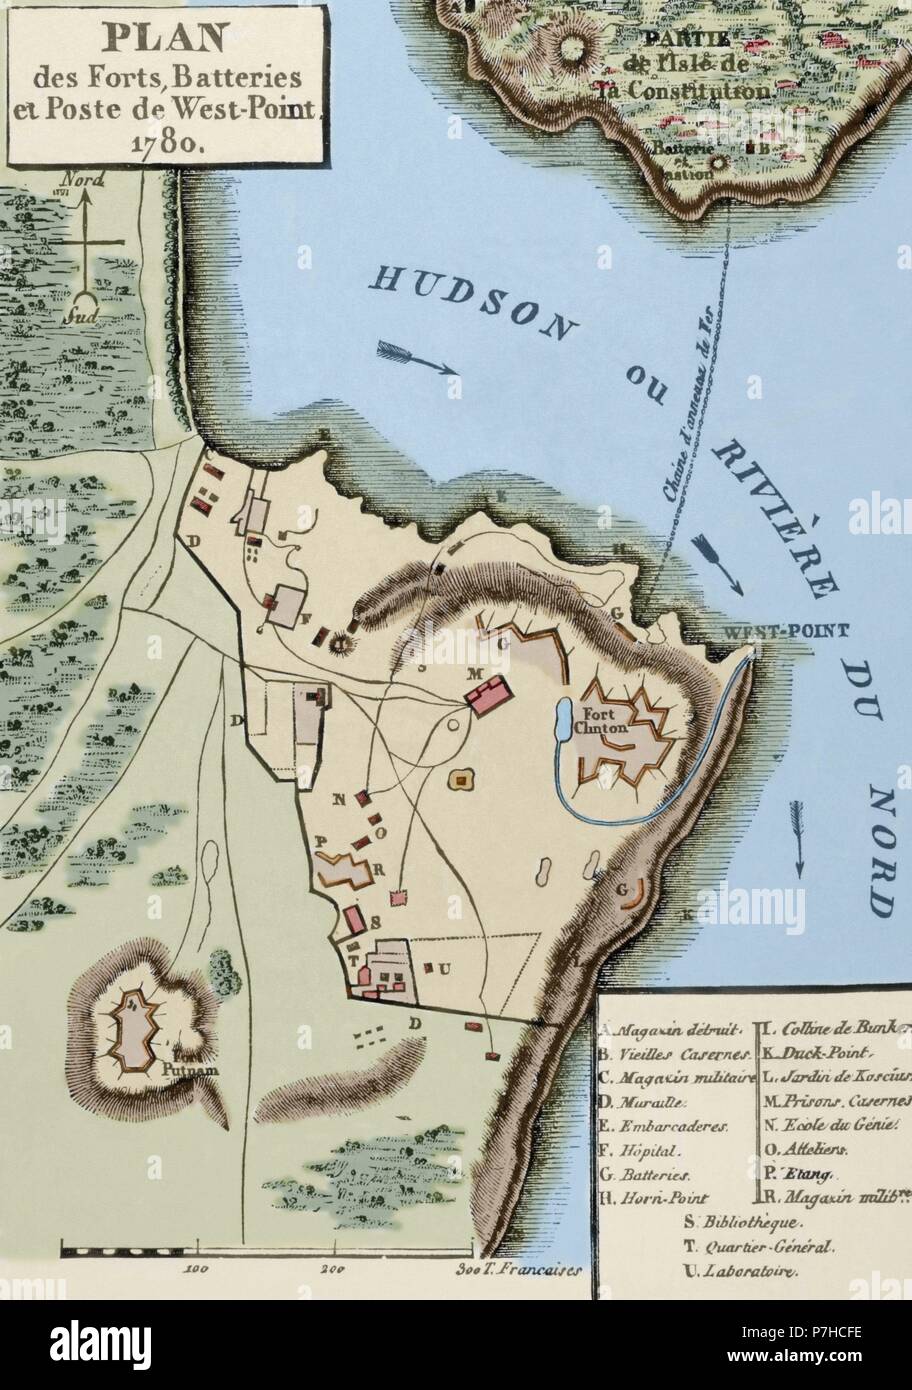 American Revolutionary War (1775-1783). Map of the defense network at West Point, including the Great Chain, Constitution Island, Fort Clinton, and Fort Putnam, 1780. Engraving. Colored. Stock Photo